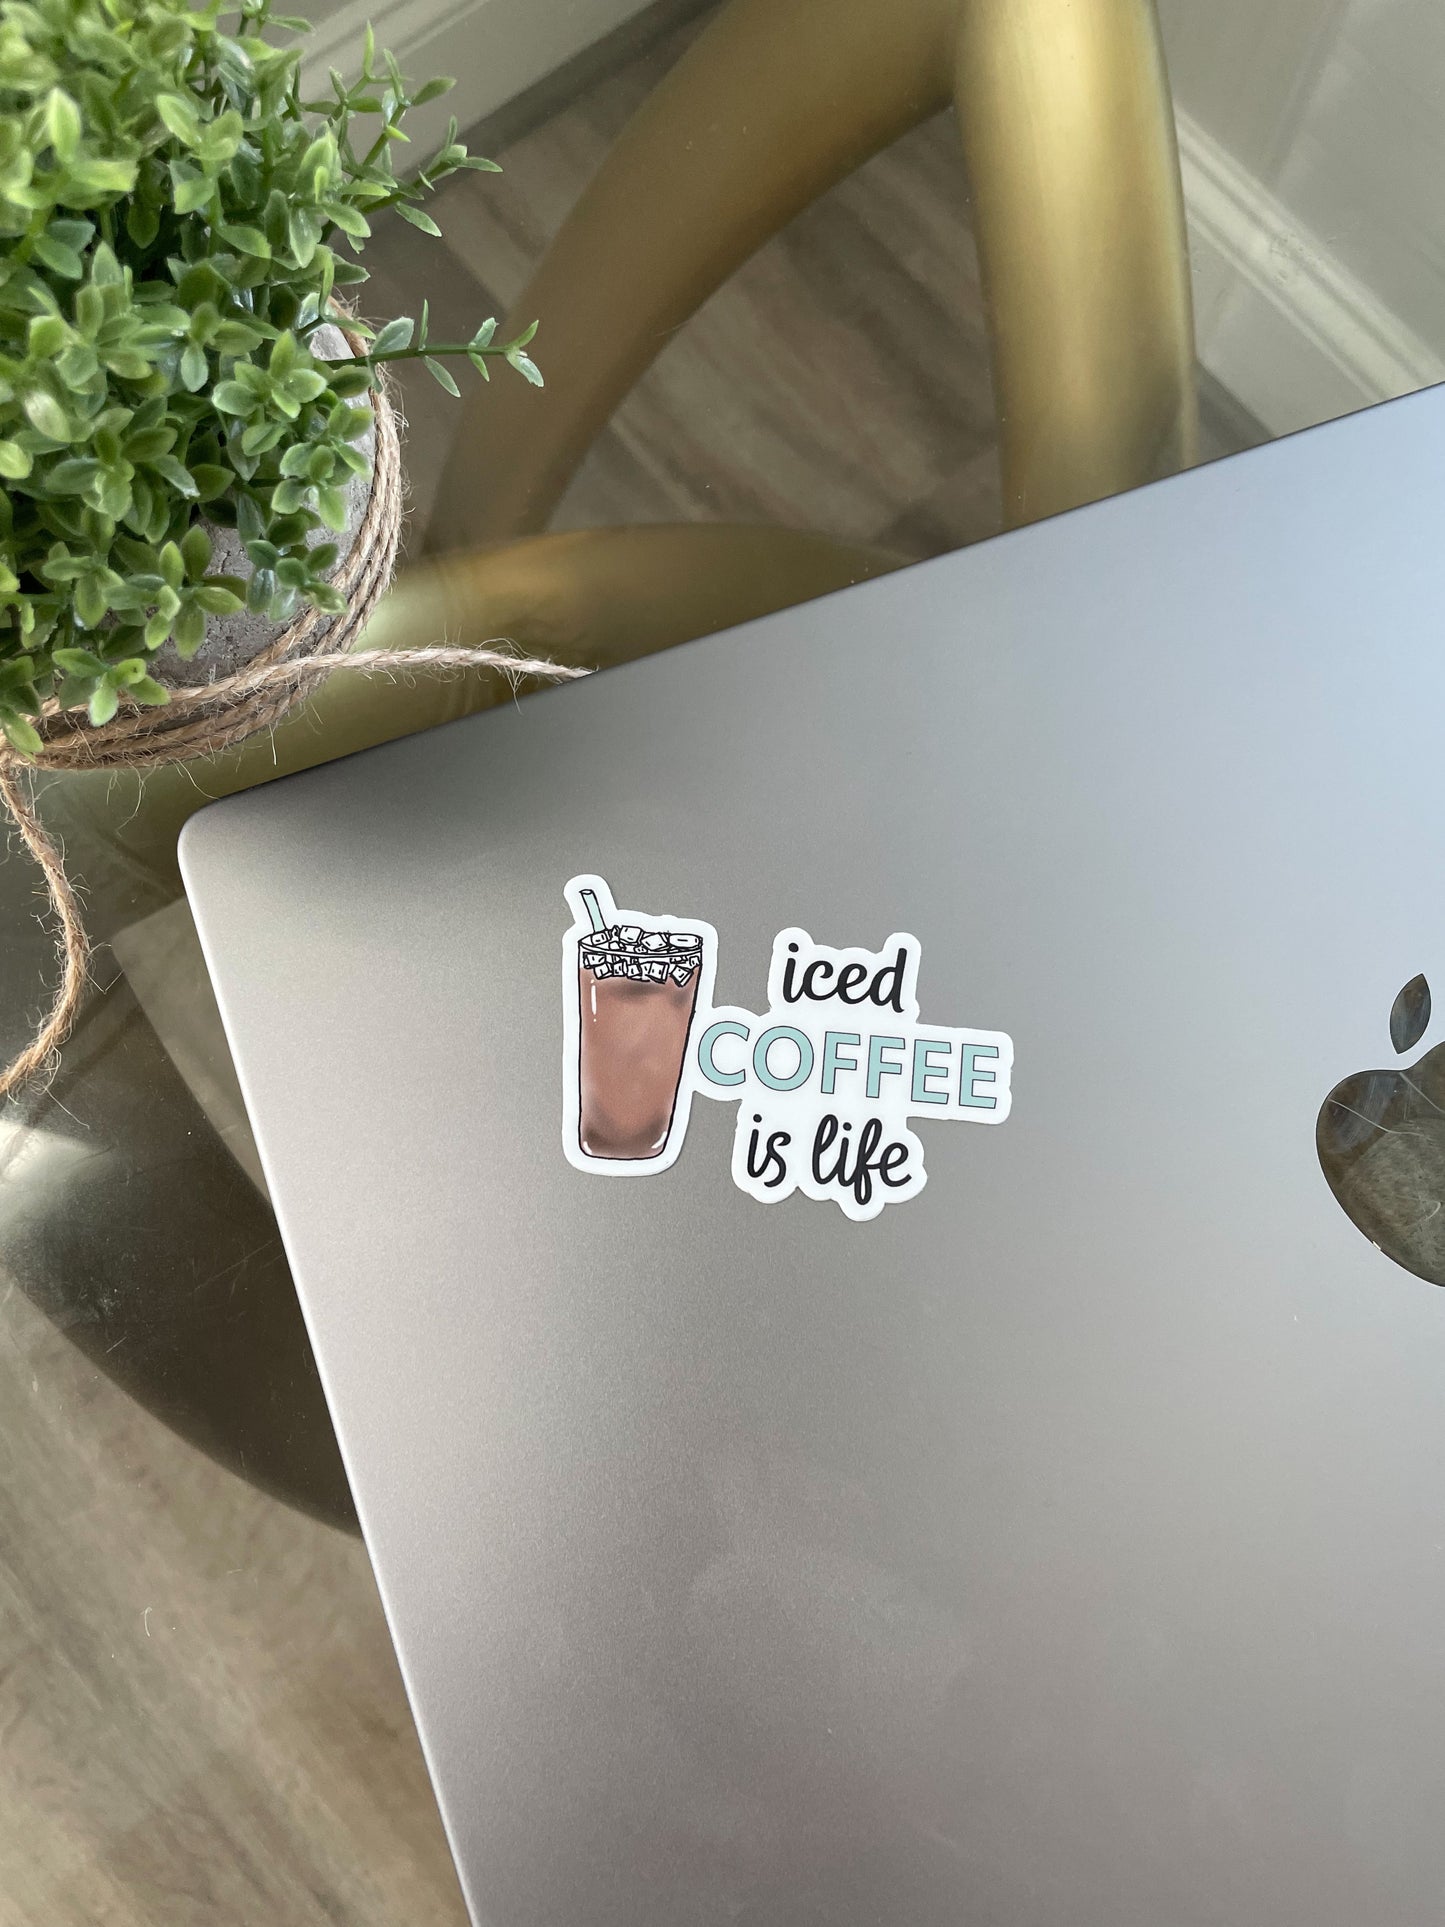 Iced Coffee Is Life vinyl sticker pictured on laptop